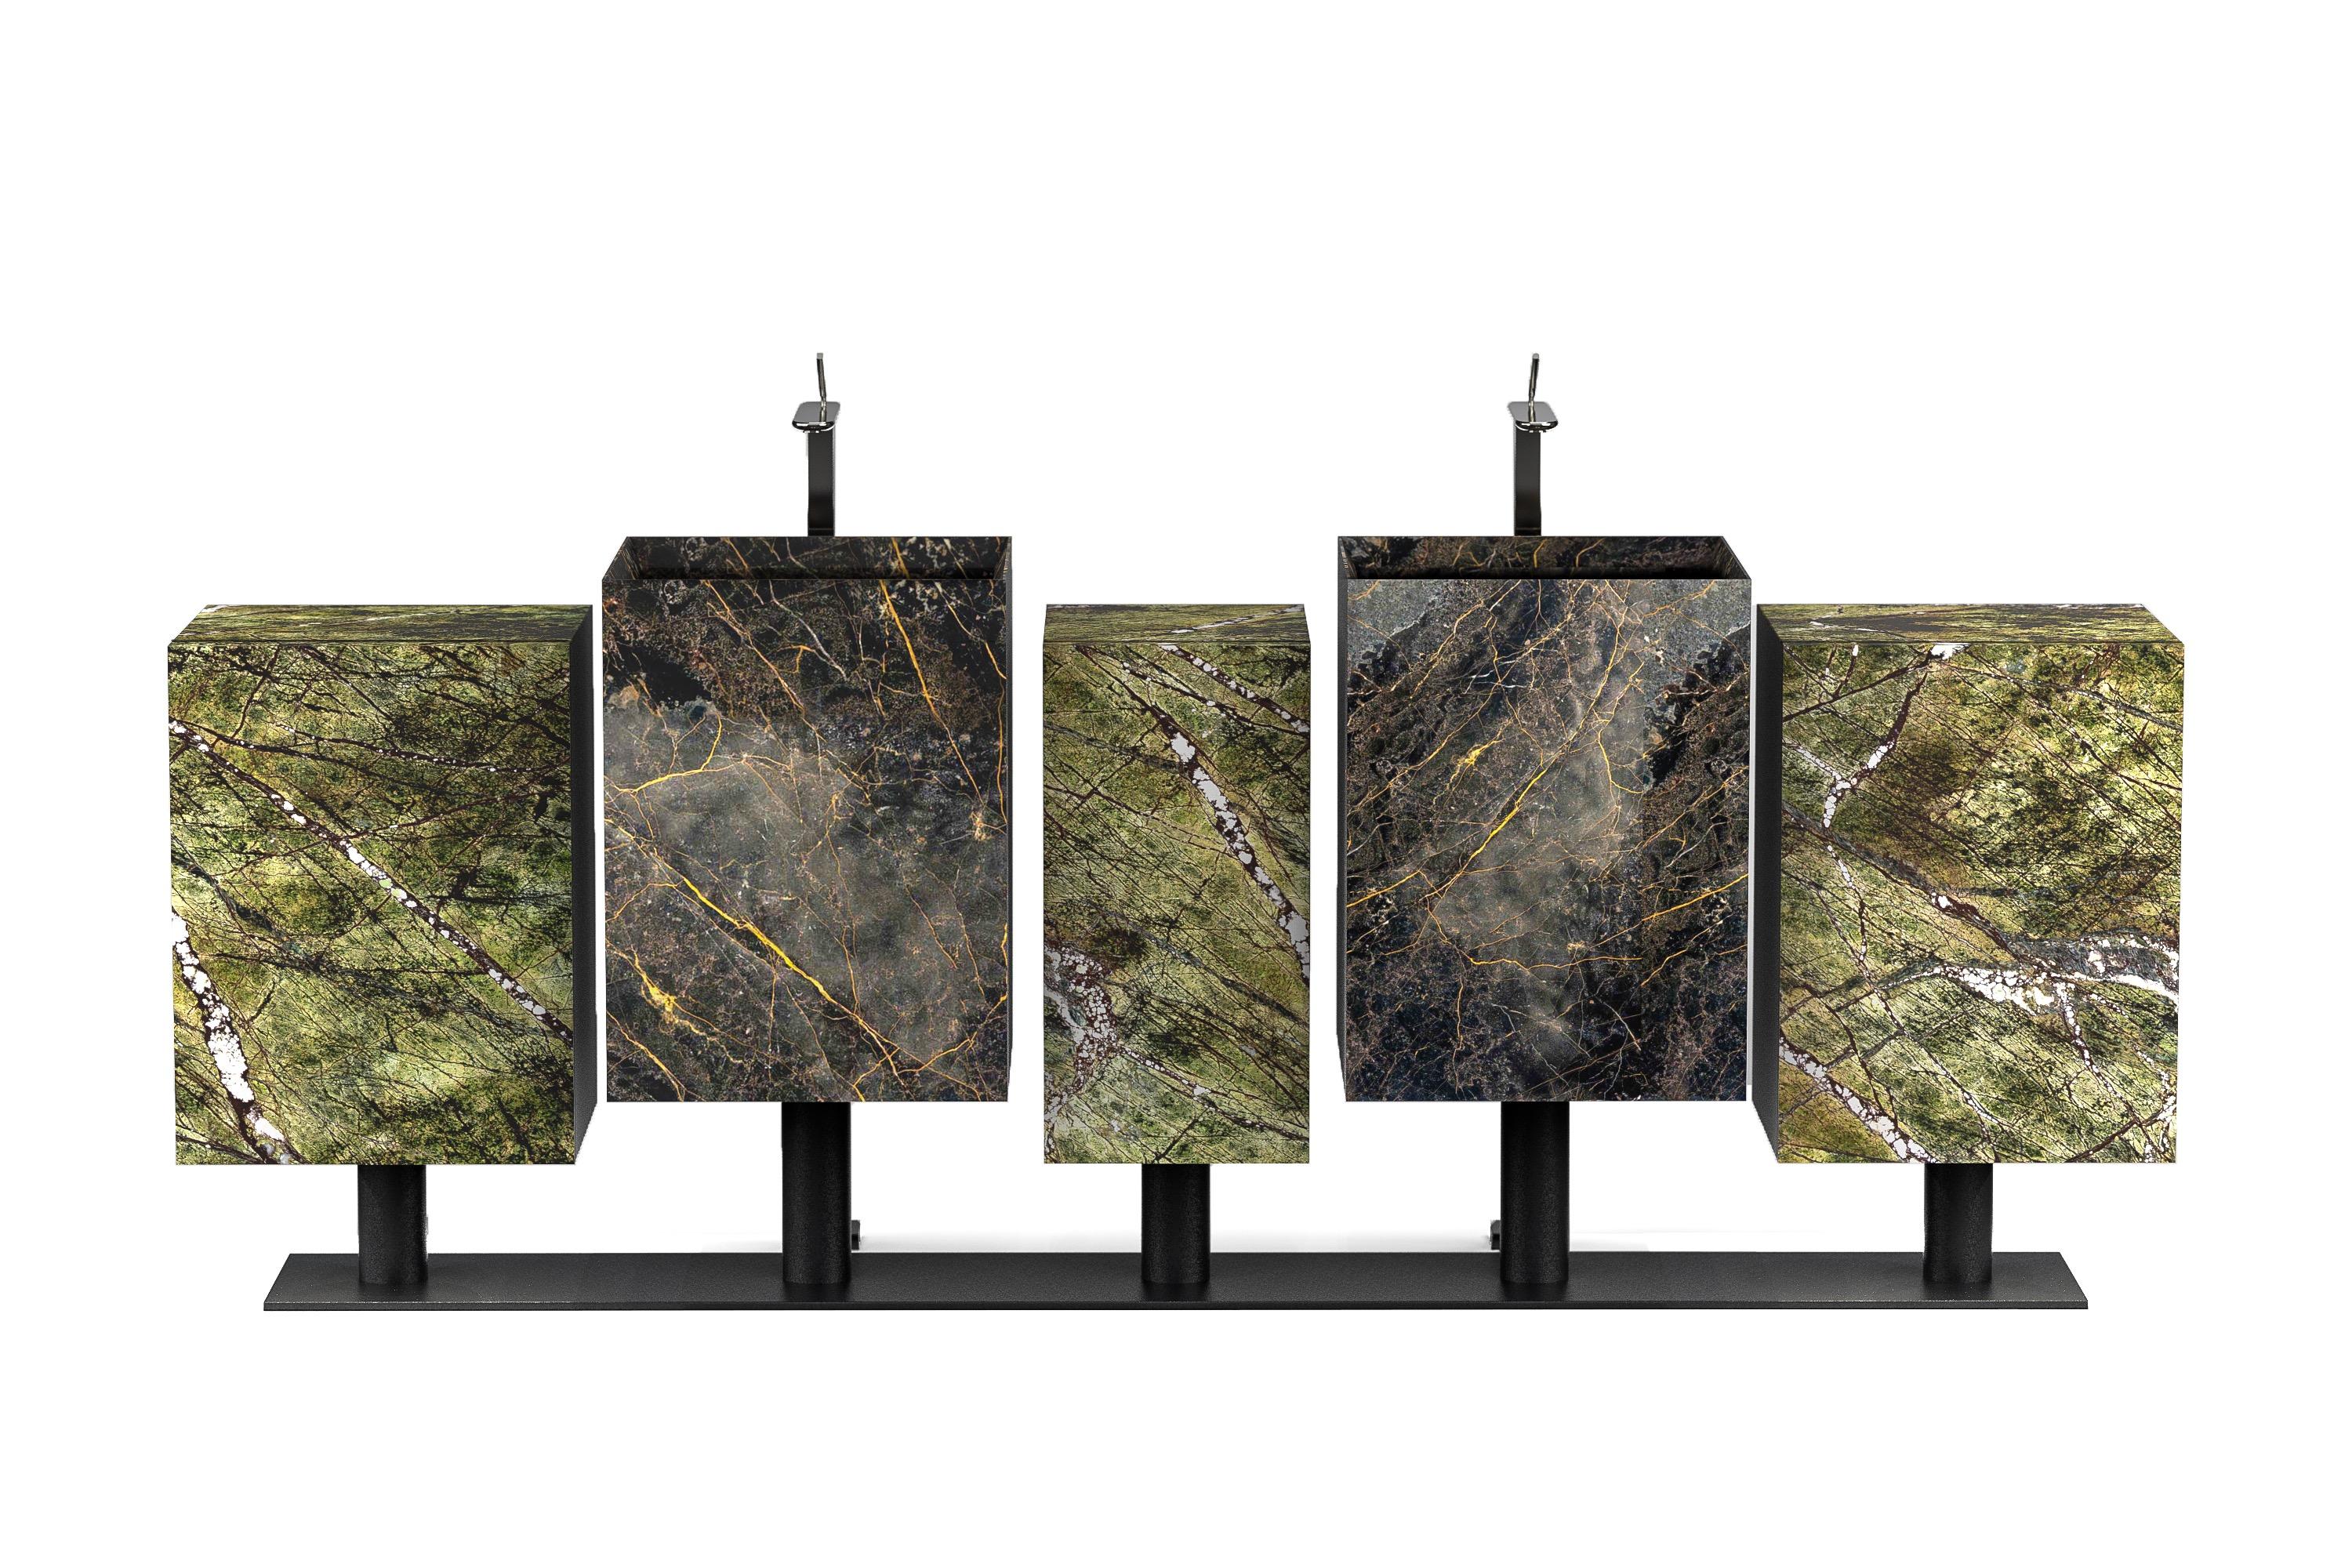 Cubi washbasin and cabinet by Marmi Serafini
Materials: Picasso Green marble, Port Saint Laurent marble, brunished metal.
Dimensions: D 226 x W 45 x H 85 cm
Available in other marbles.
Tap not included.

Clean, refined and functional bathroom